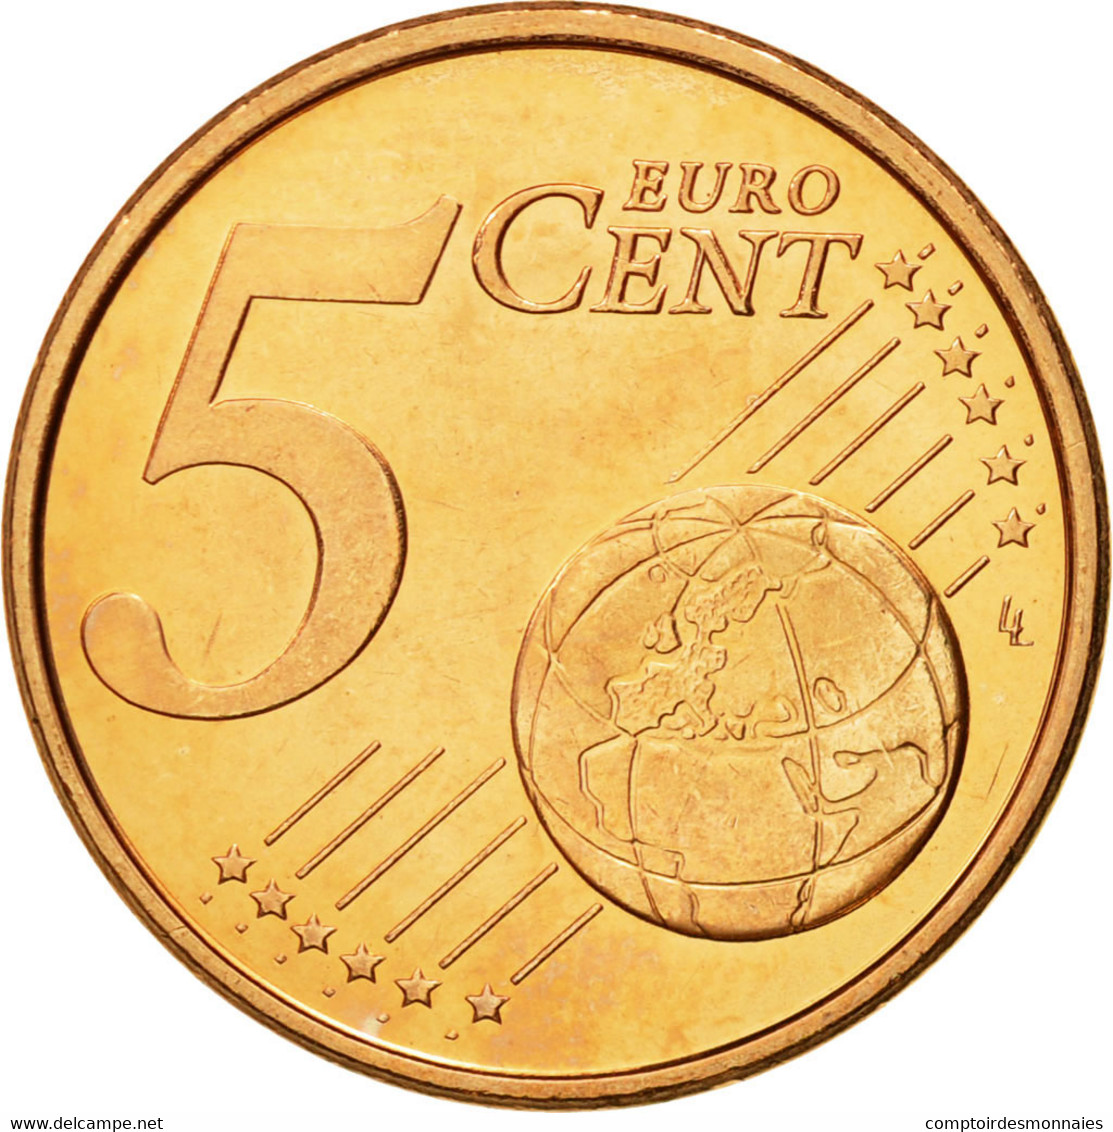 Chypre, 5 Euro Cent, 2009, FDC, Copper Plated Steel, KM:80 - Zypern